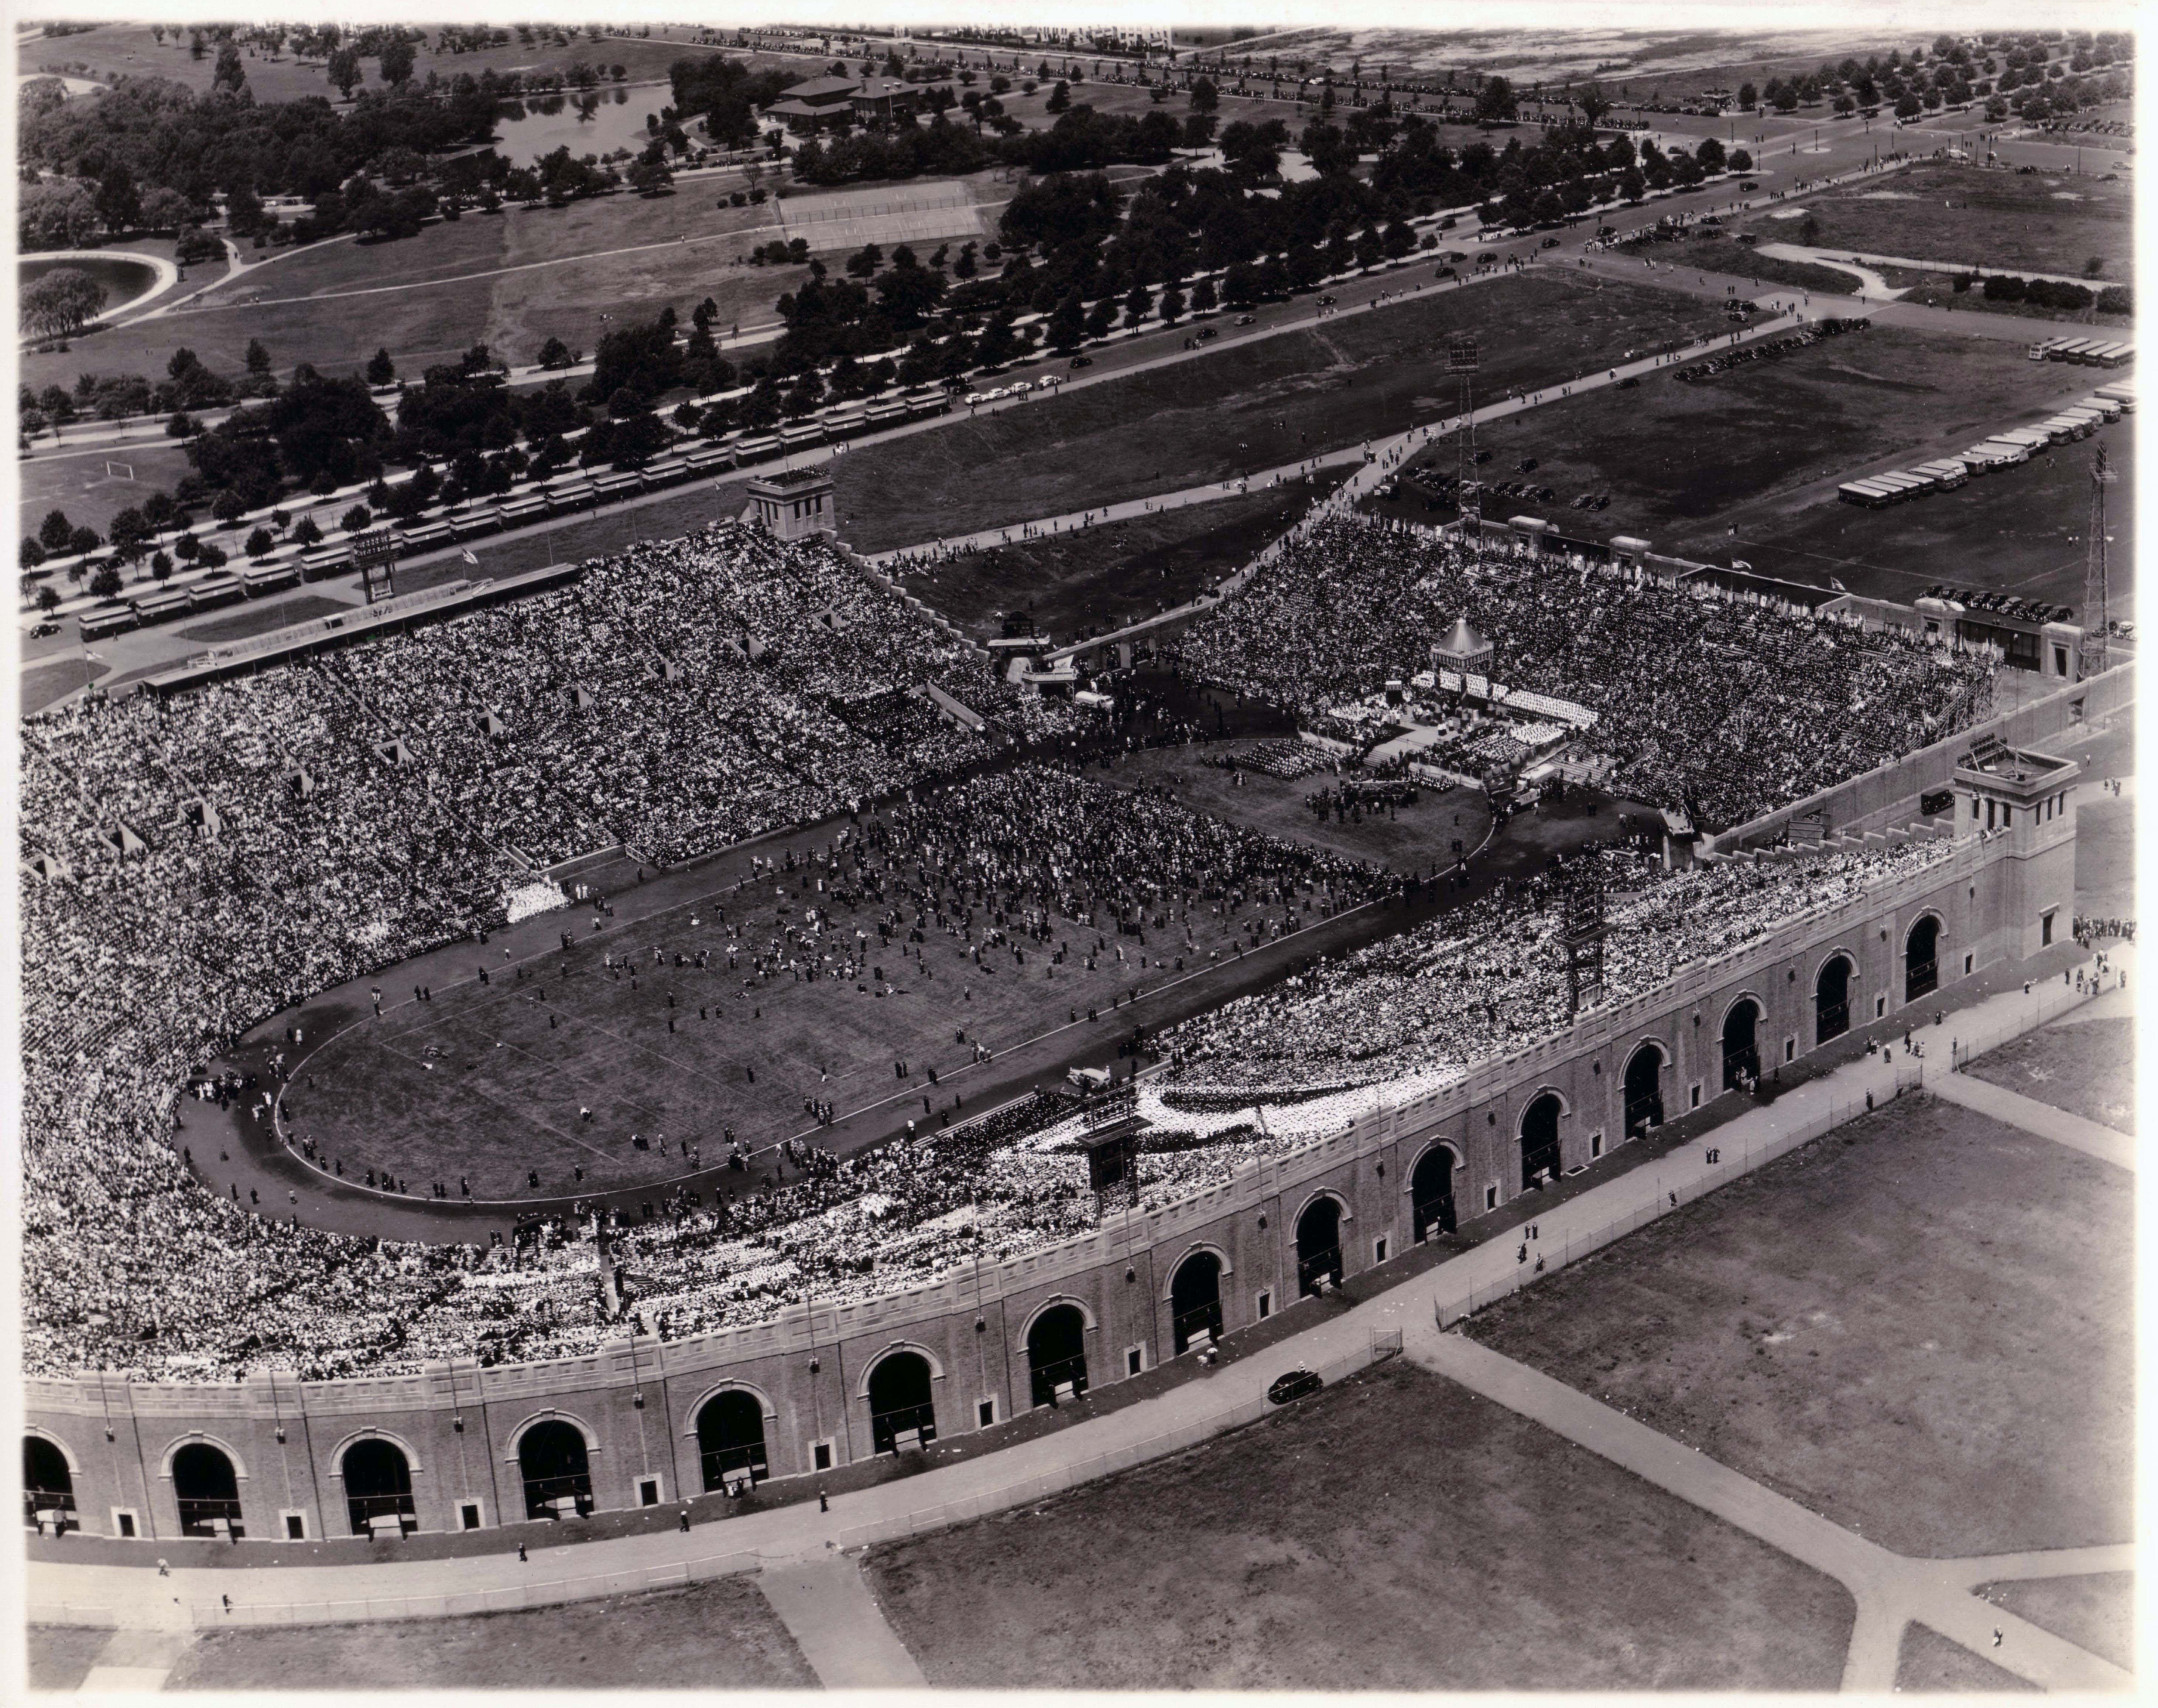 Black and white aerial photograph of an open-air stadium full of people